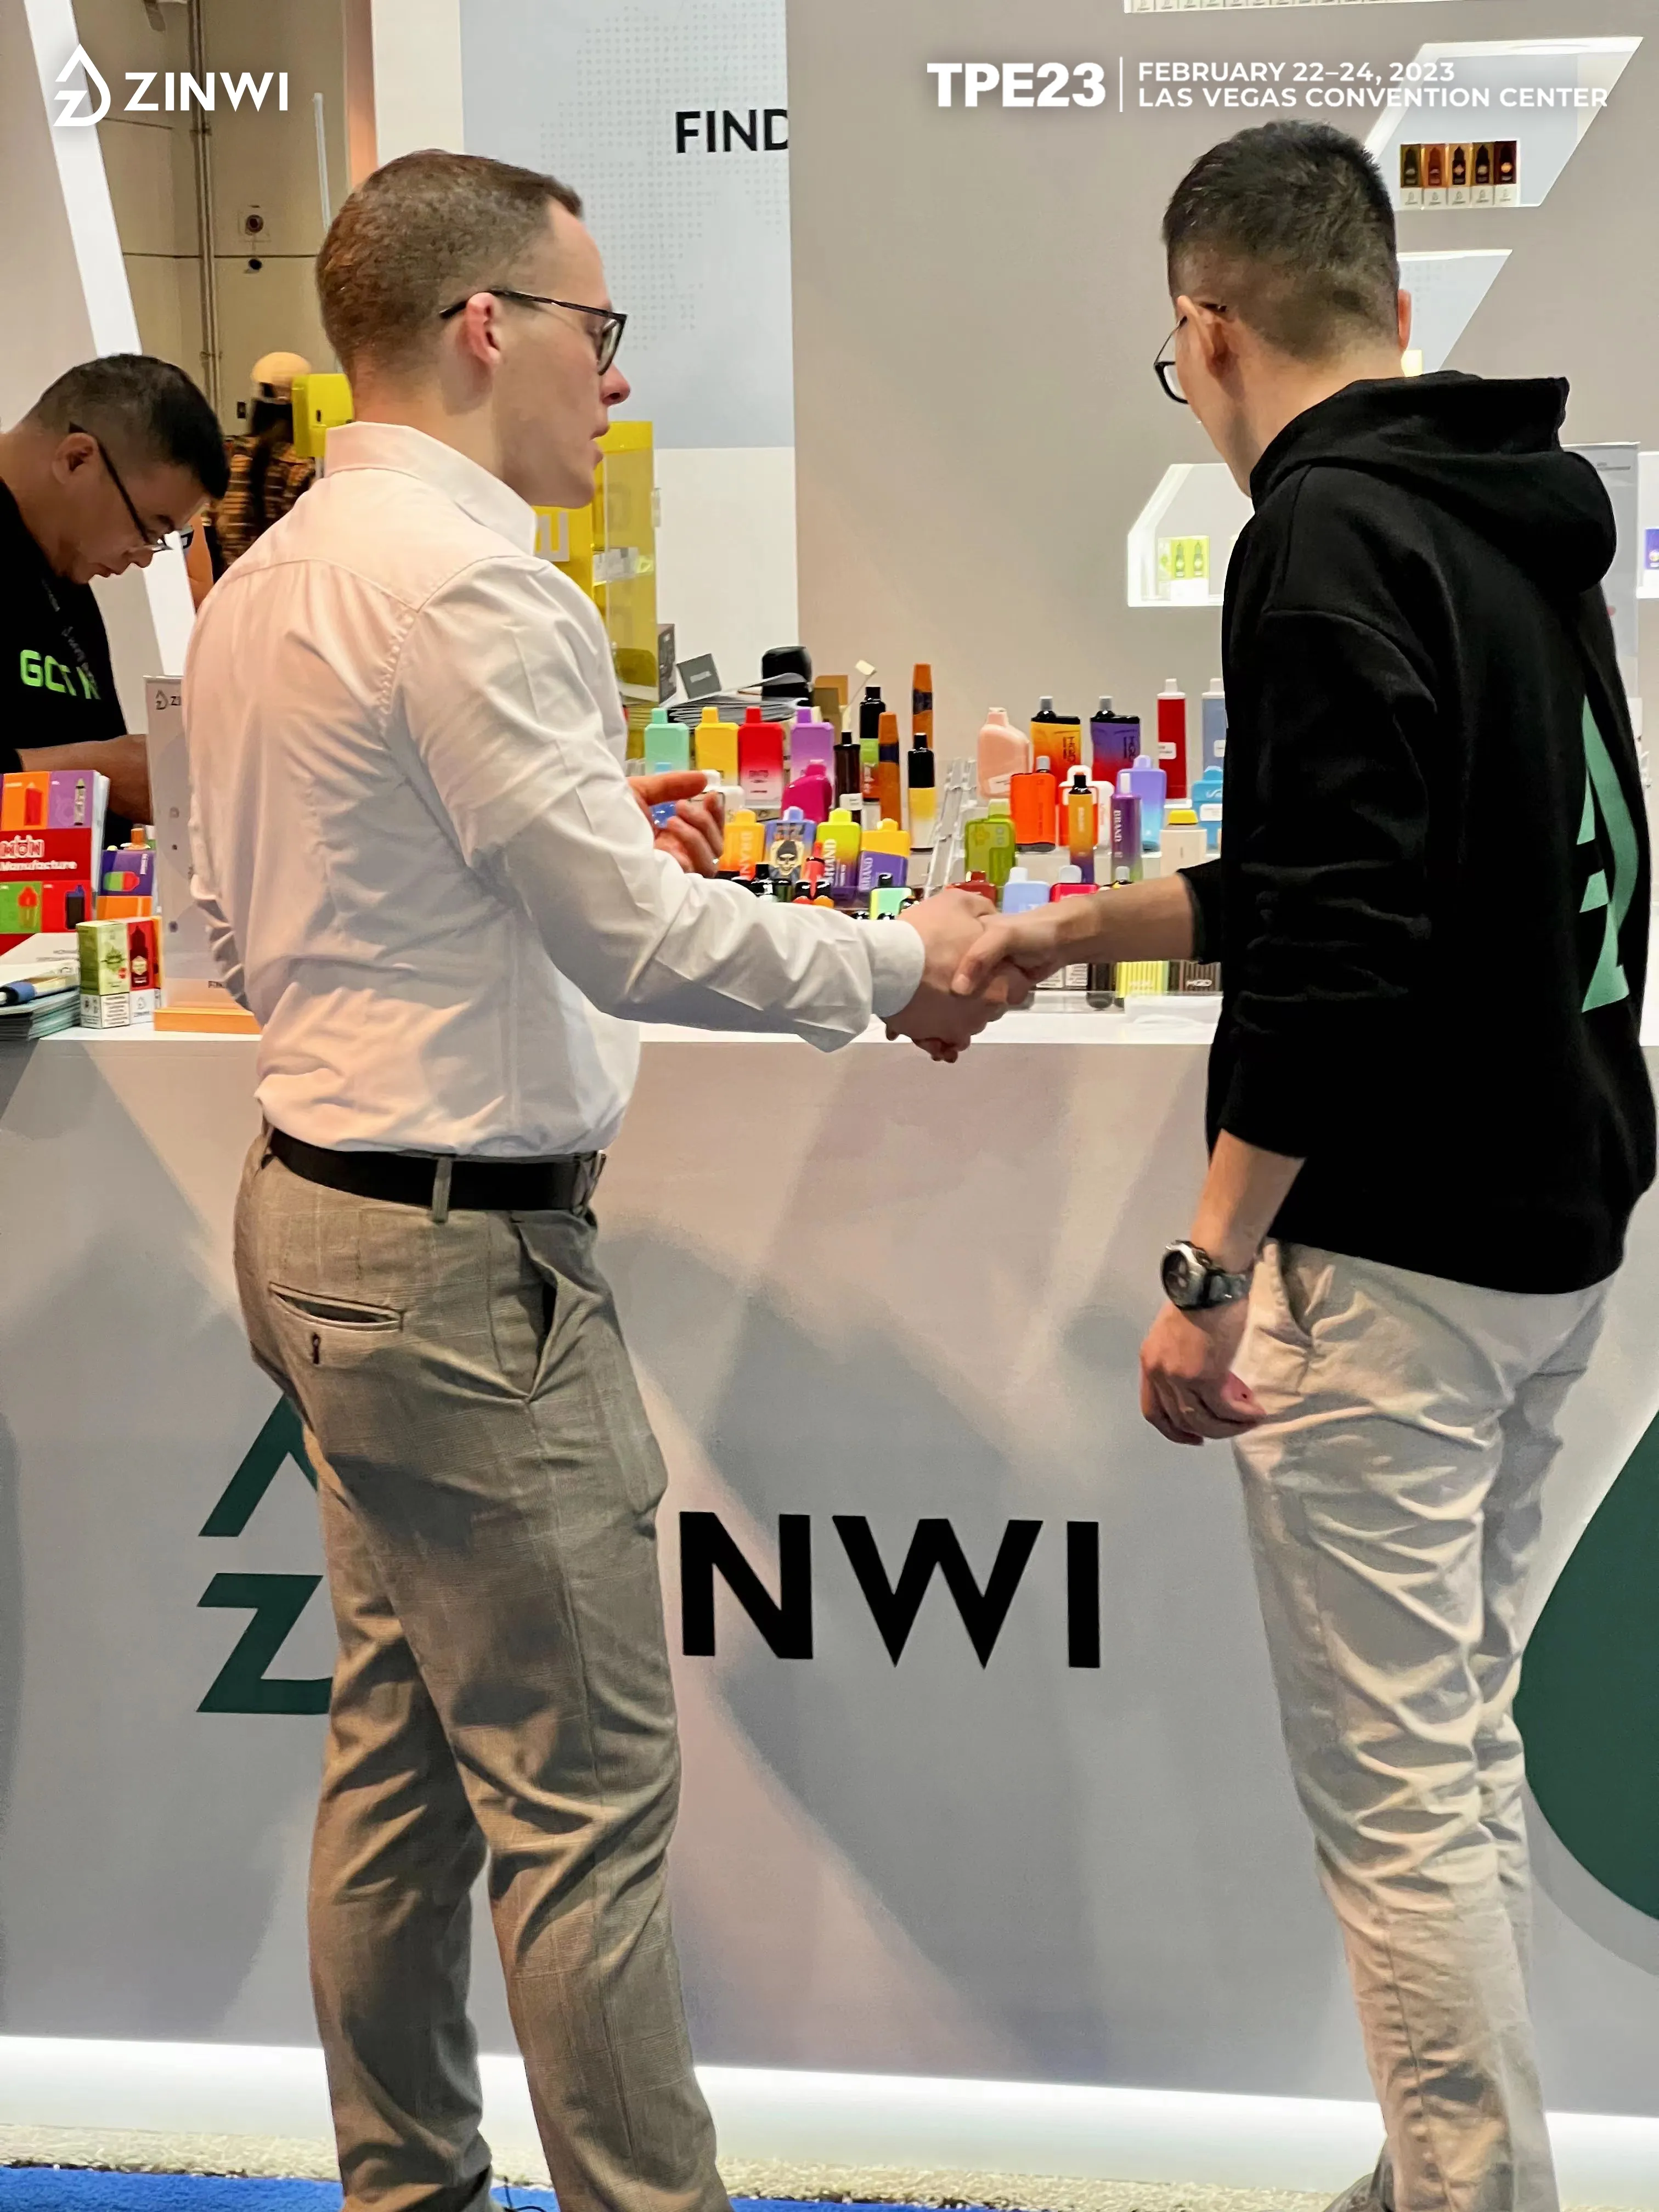 From the tobacco flavor to the sweet flavor, Zinwi Biotech demonstrated its profound fragrance-blending ability. Many e-liquid lovers come here to experience the authentic flavor.